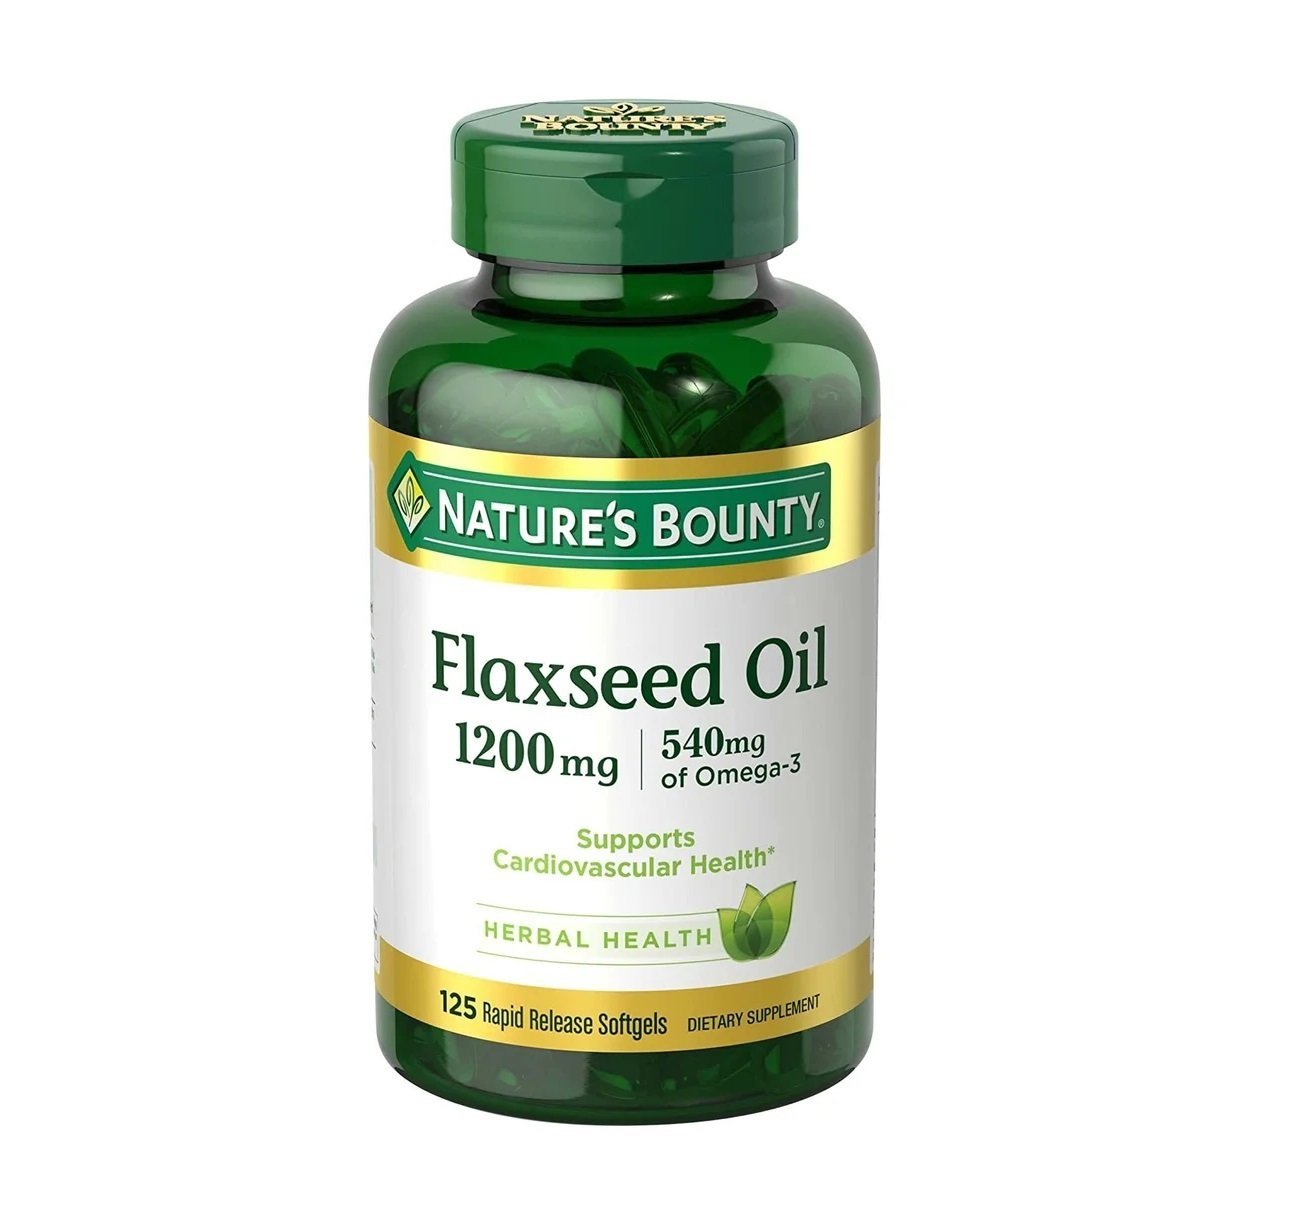 Nature’s Bounty Flaxseed Oil